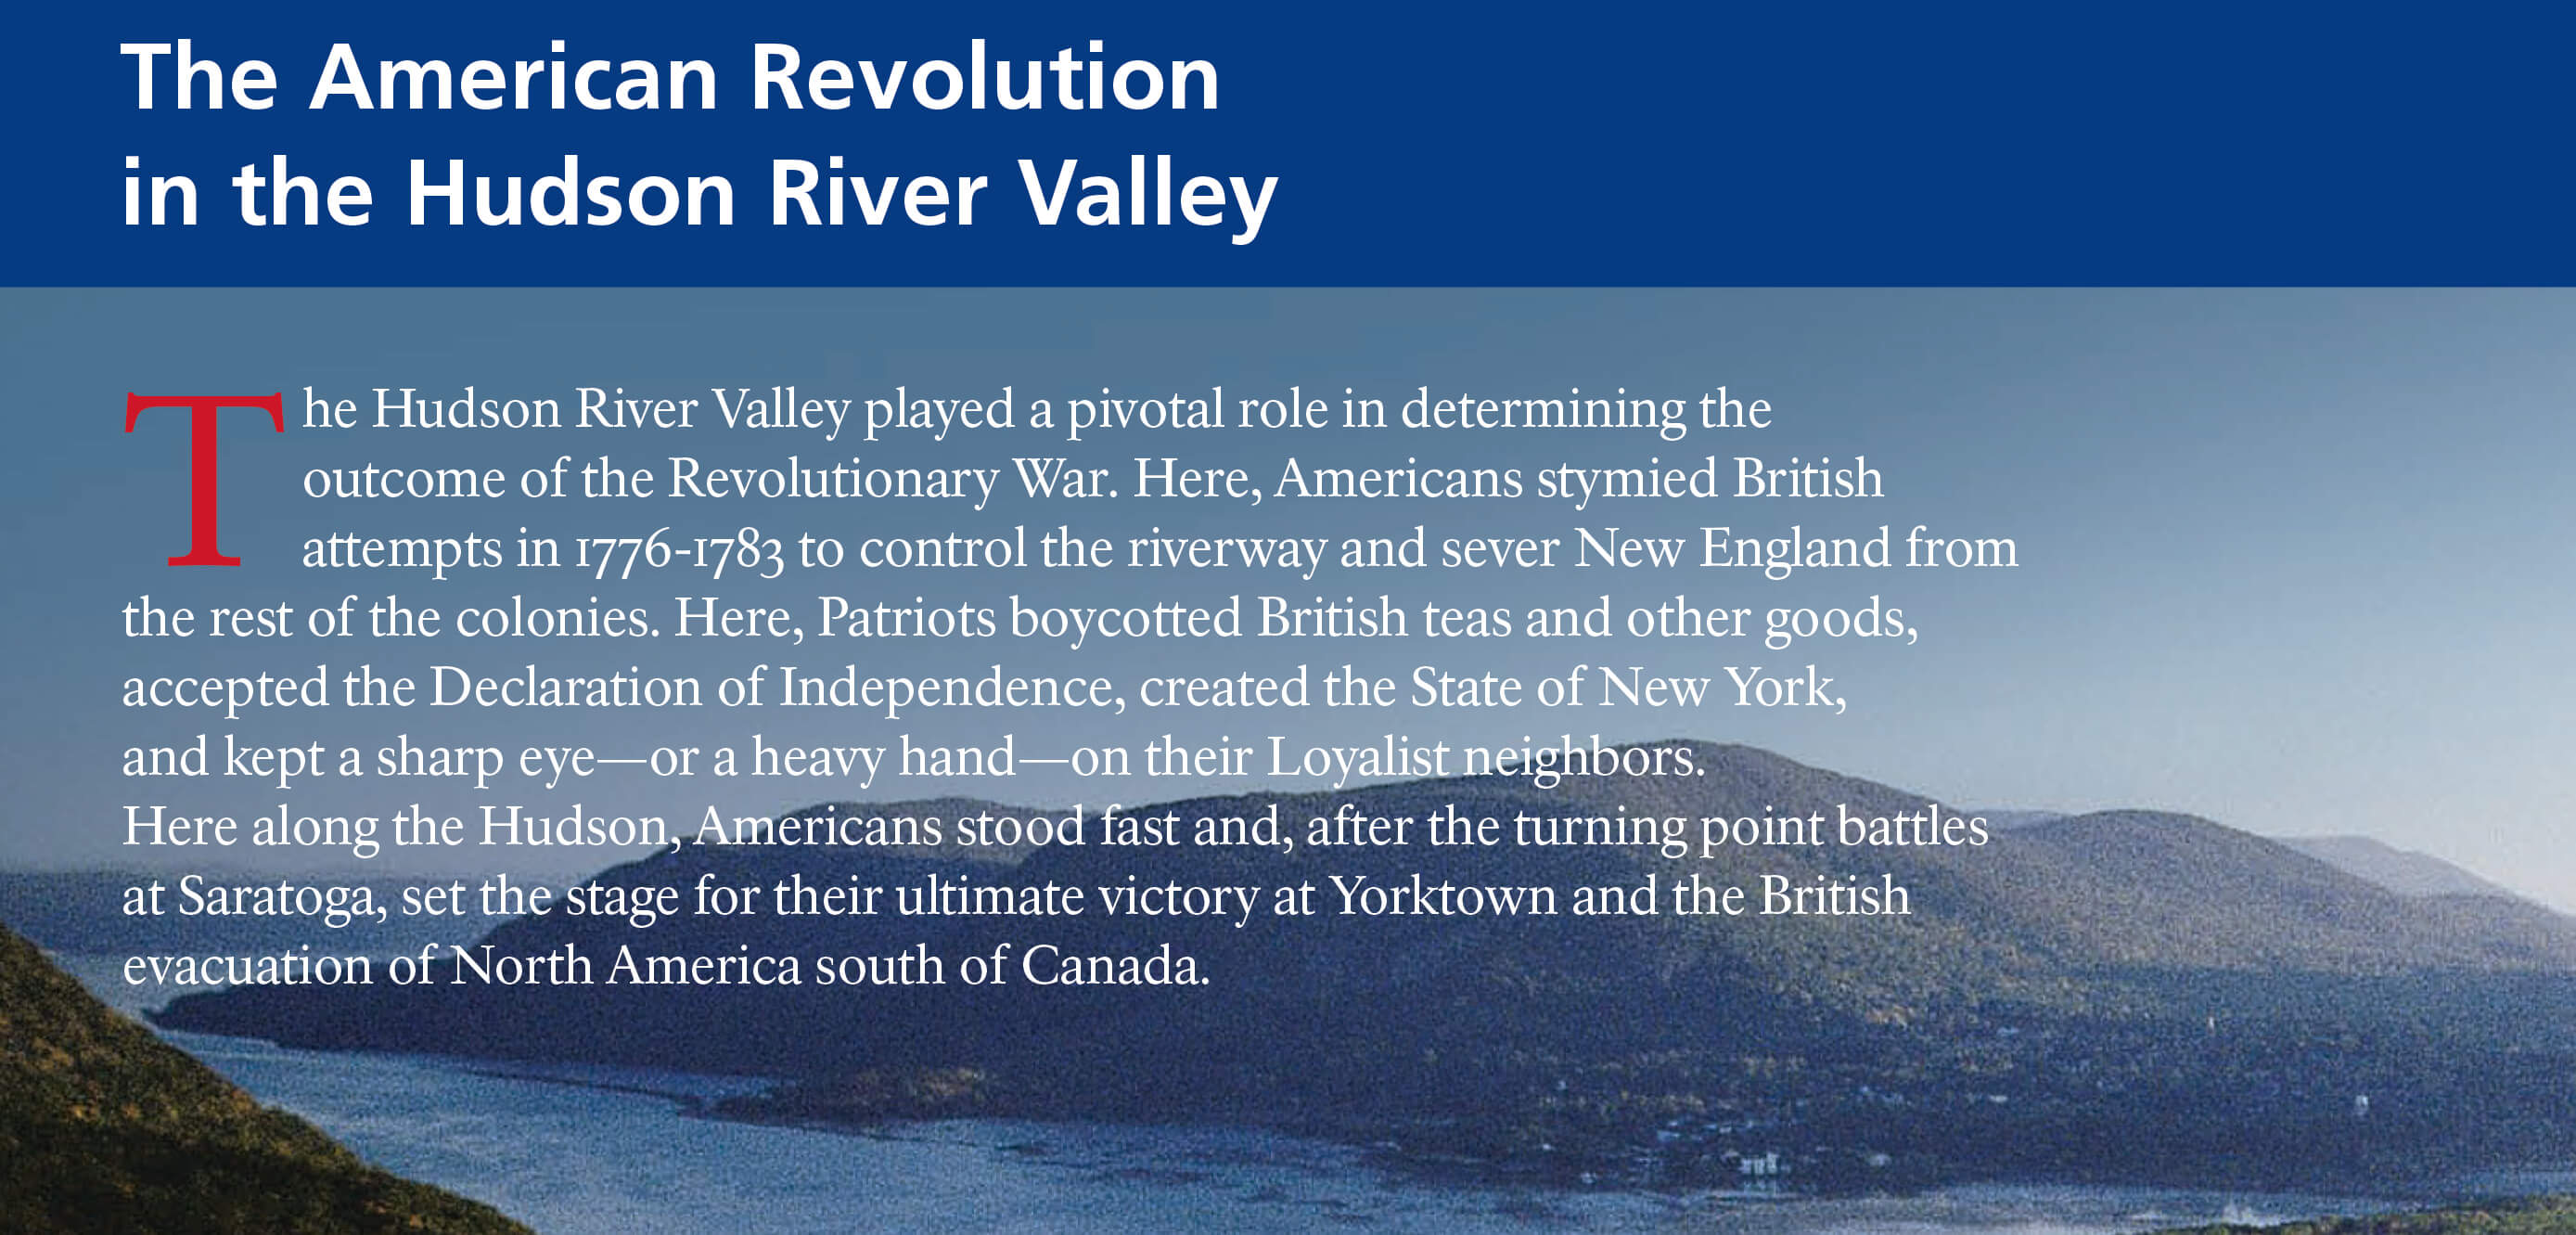 The American Revolution in the Hudson River Valley